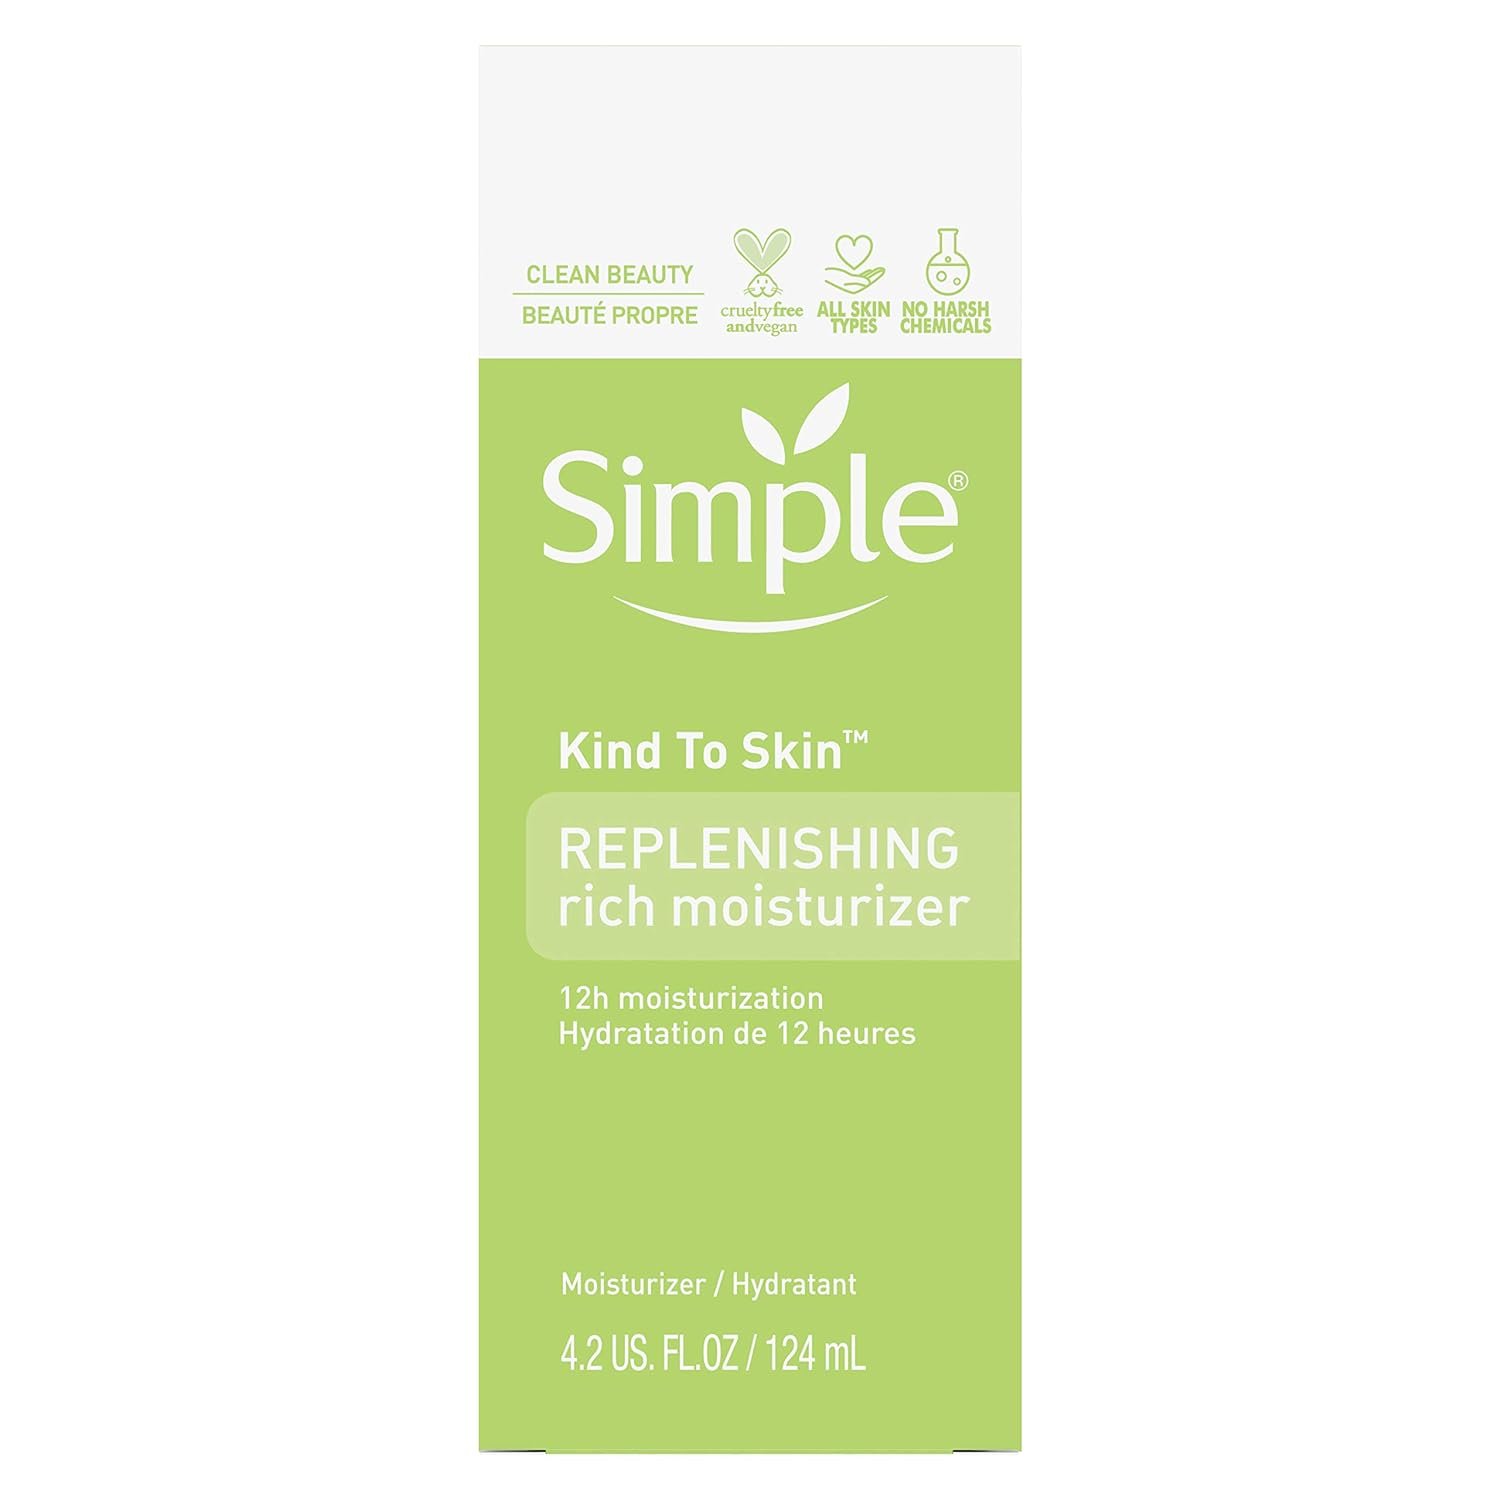 Simple Kind to Skin Face Moisturizer Replenishing Rich 12-Hour Moisturization for All Skin Types, 4.2 fl oz - image 3 of 12